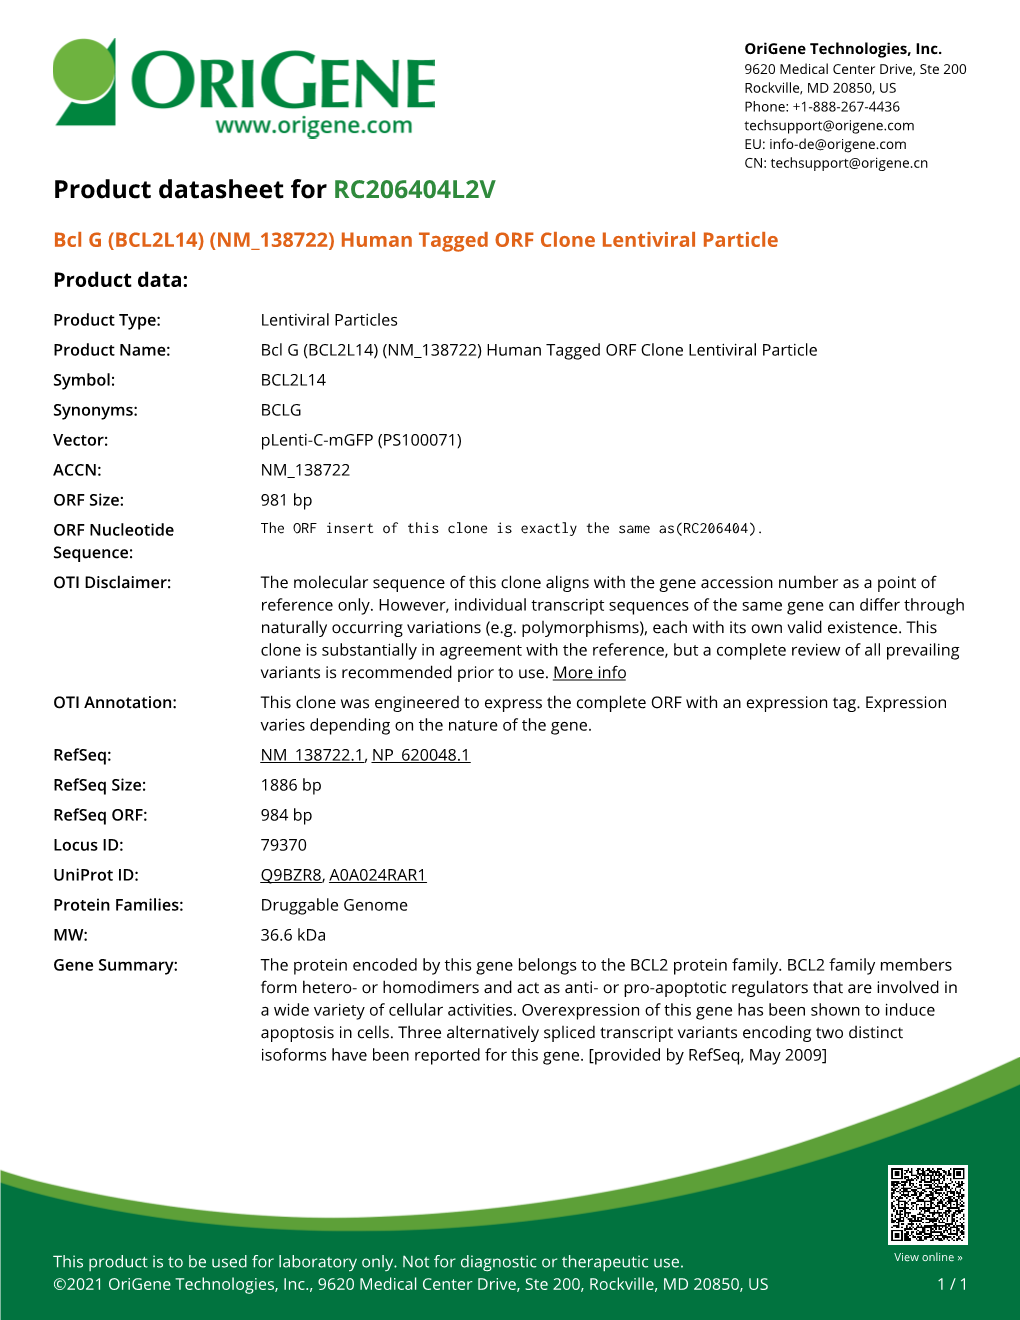 (BCL2L14) (NM 138722) Human Tagged ORF Clone Lentiviral Particle Product Data